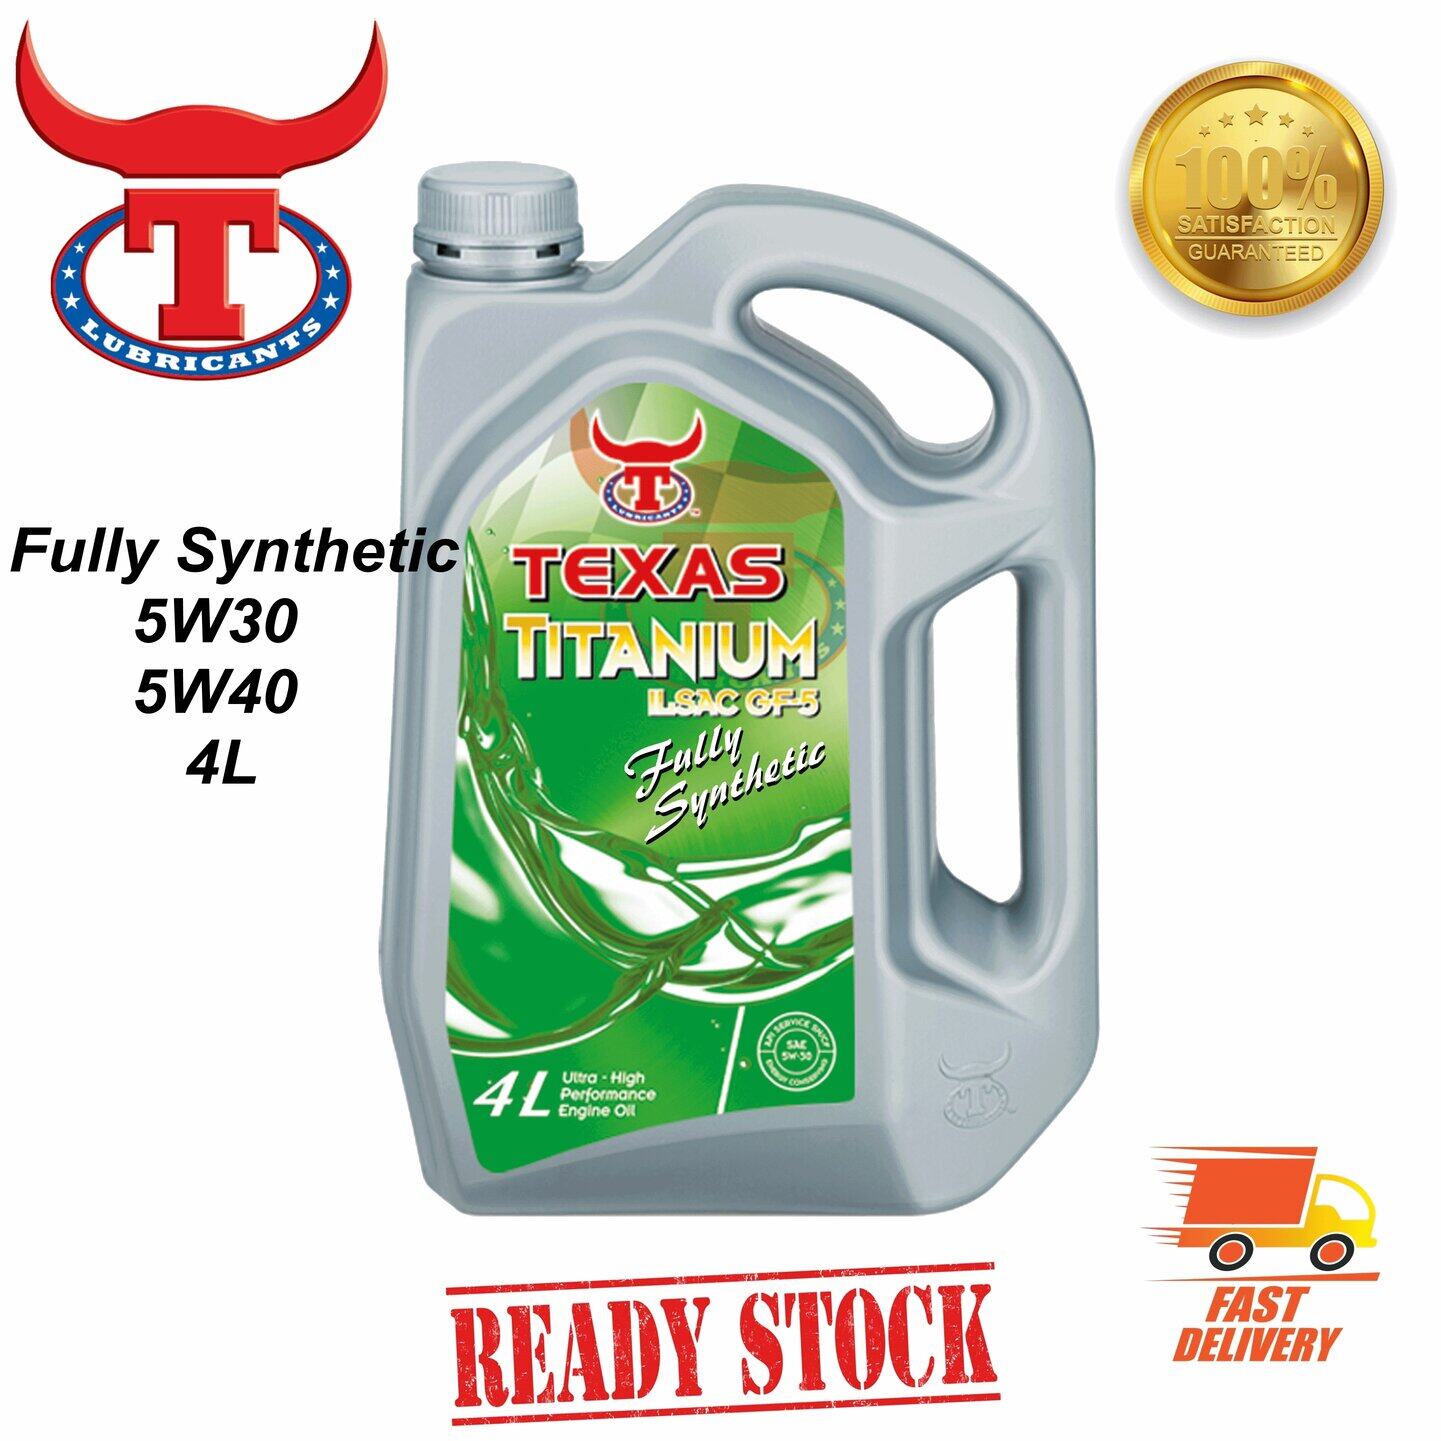 TEXAS Titanium Fully Synthetic 5W30 / 5W40 High Performance Engine Oil 4L